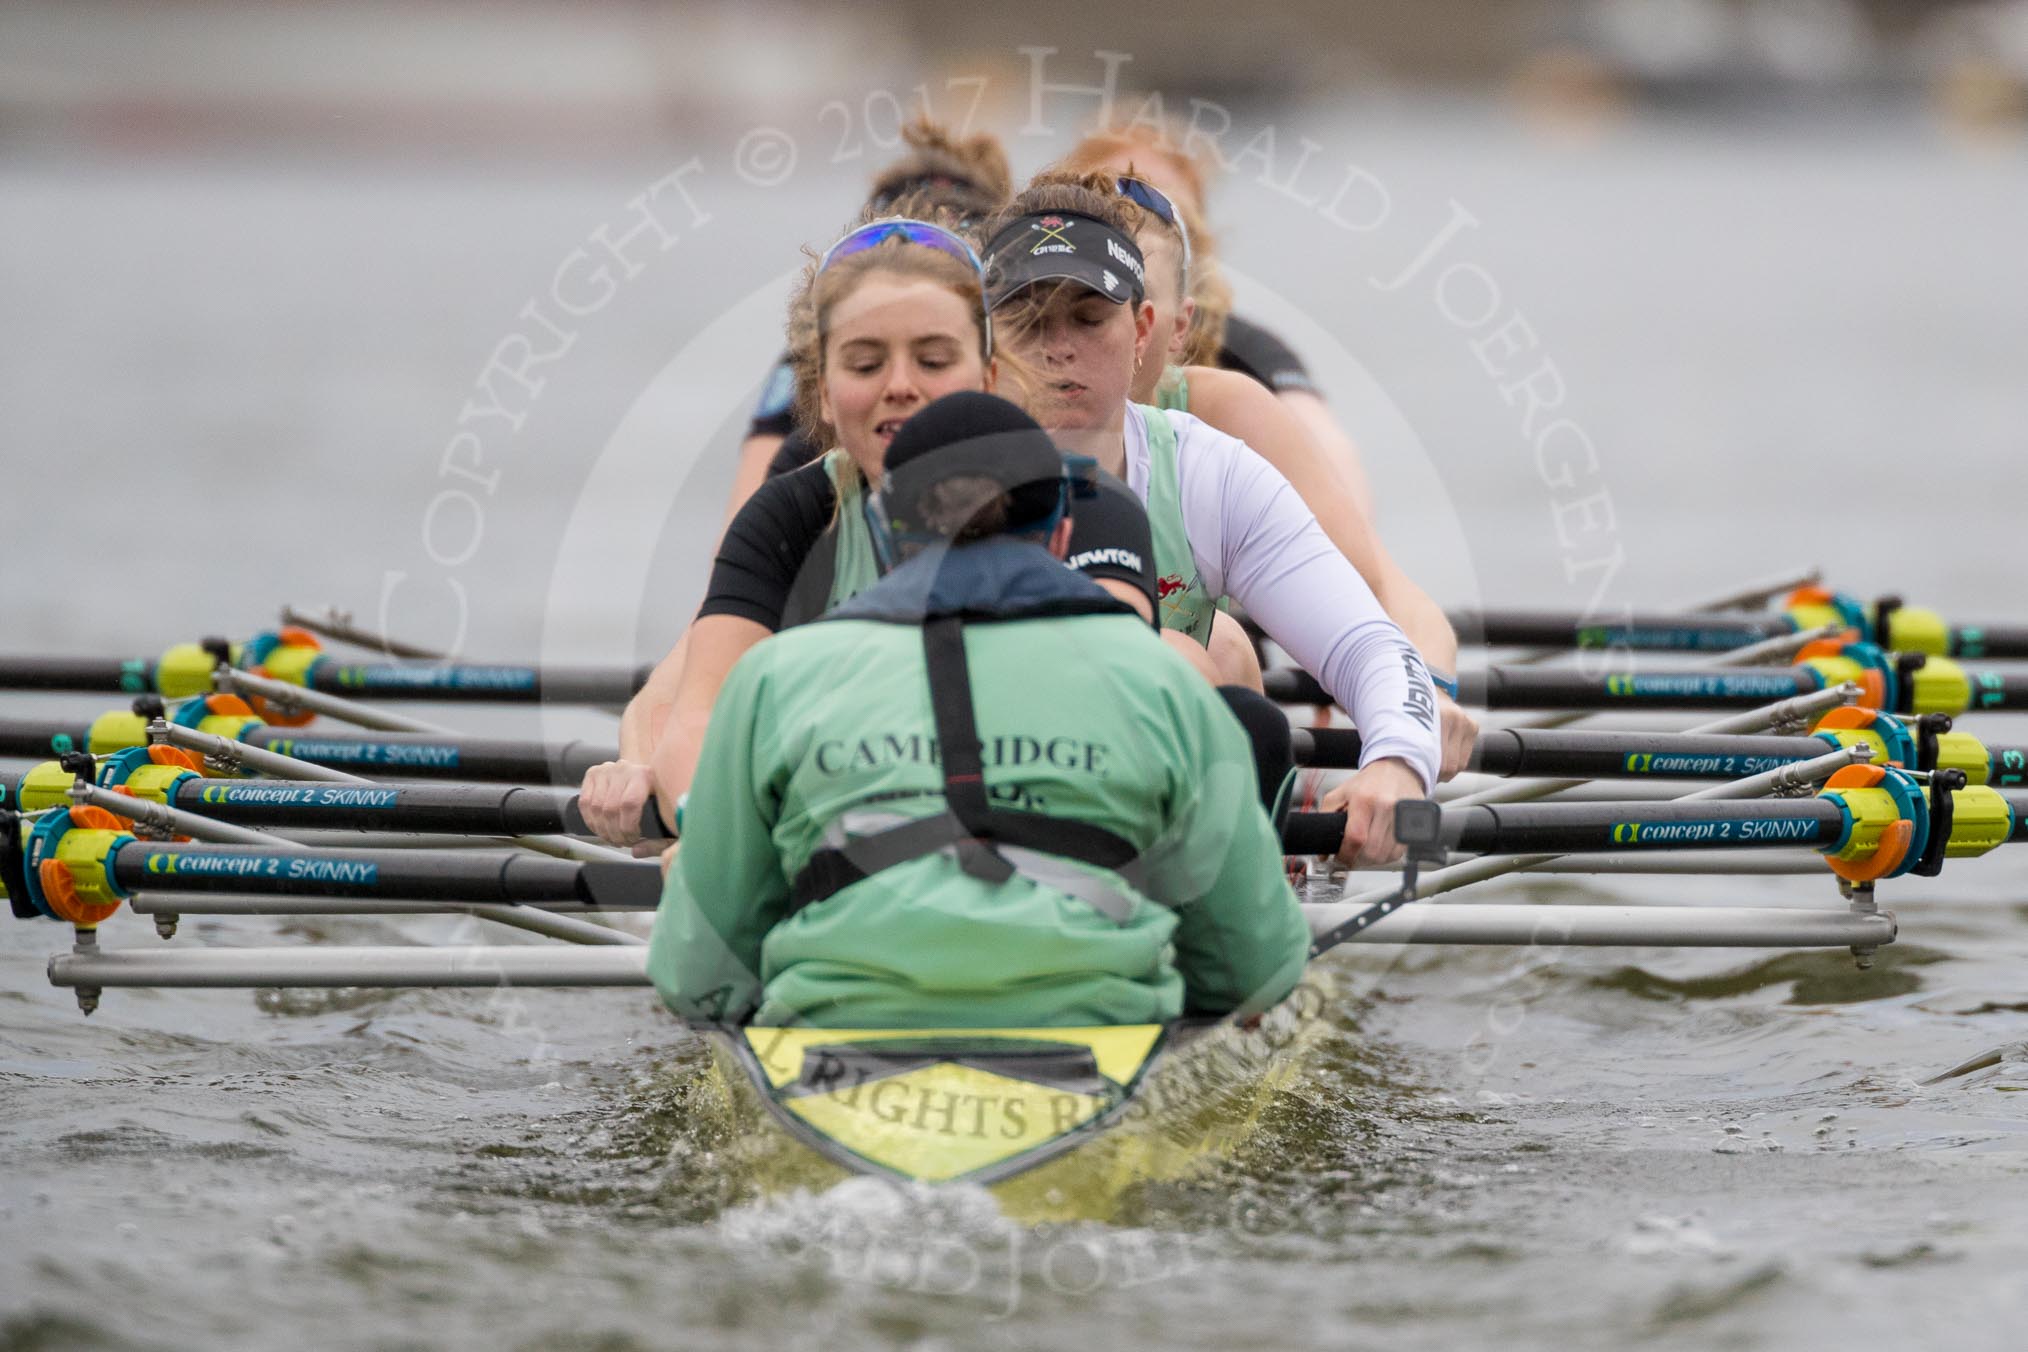 The Boat Race season 2017 - Women's Boat Race Fixture CUWBC vs Univerity of London: The CUWBC eight at the start of the race, cox - Matthew Holland, stroke - Alice White, 7 - Myriam Goudet, 6 - Melissa Wilson, 5 - Holy Hill, 4 - Imogen Grant, 3 - Ashton Brown, 2 - Kirsten Van Fosen, bow - Claire Lambe.
River Thames between Putney Bridge and Mortlake,
London SW15,

United Kingdom,
on 19 February 2017 at 16:01, image #65